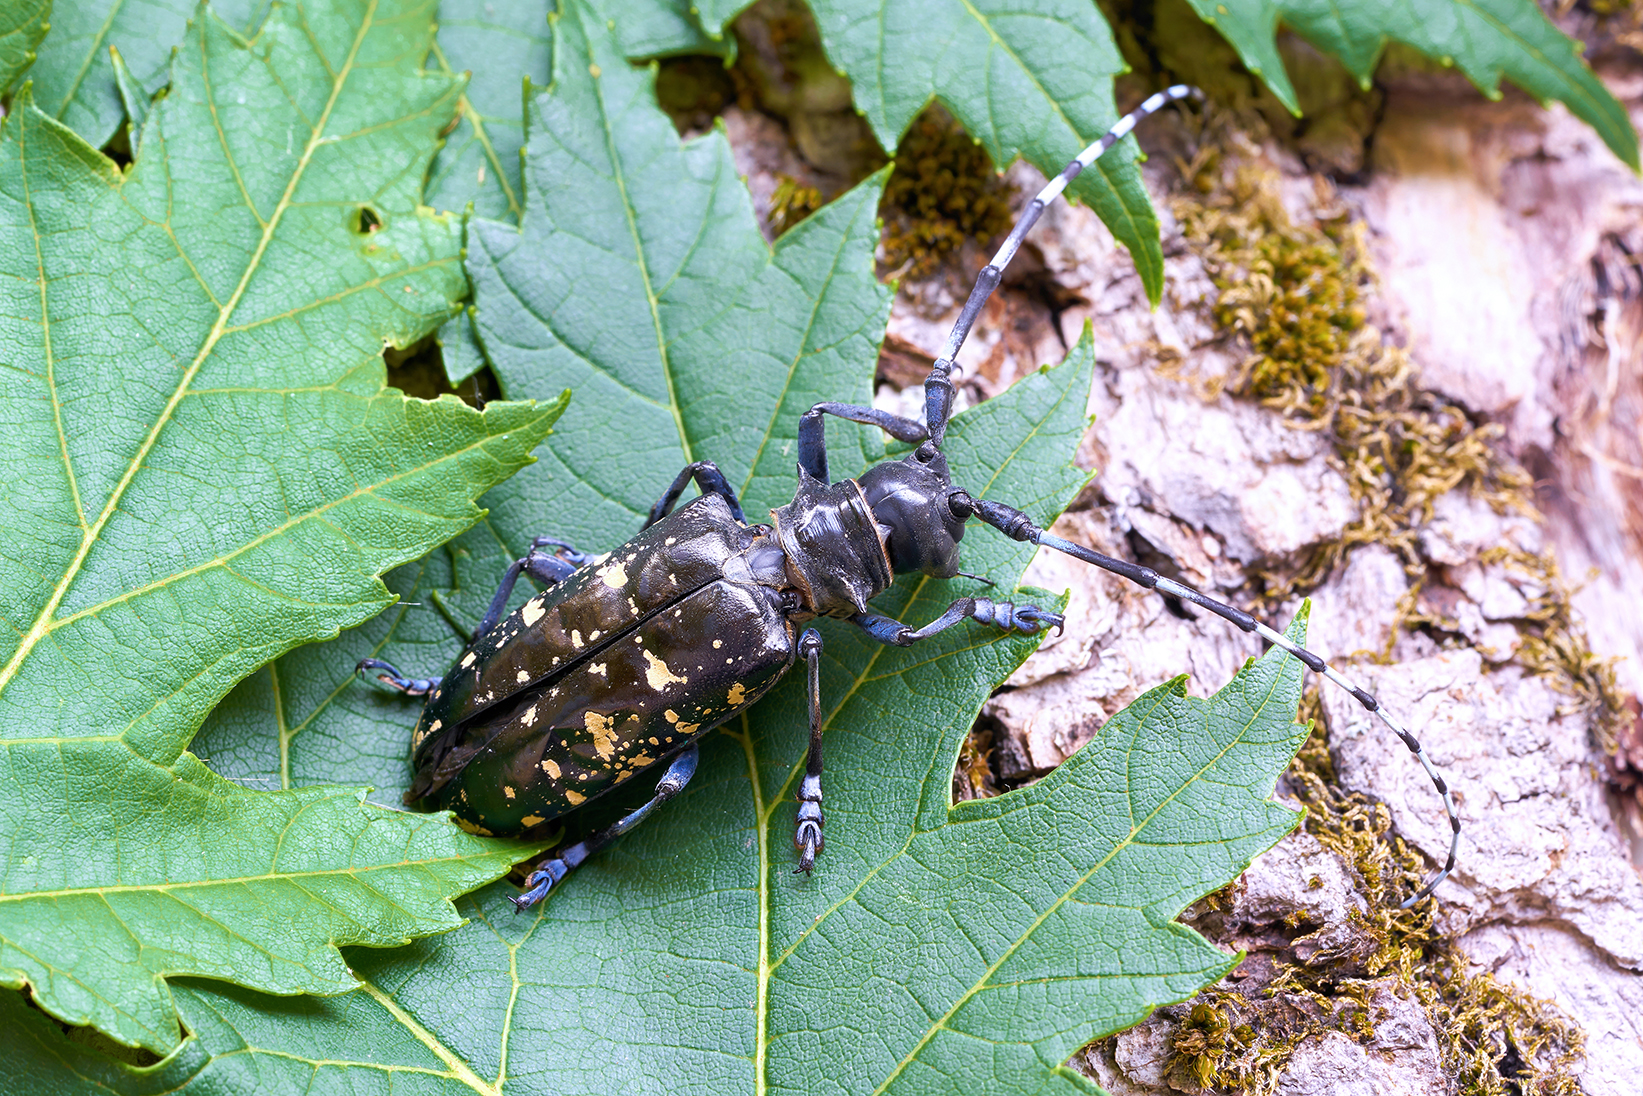 Monitoring for the Asian Longhorned Beetle – City of Upper Arlington